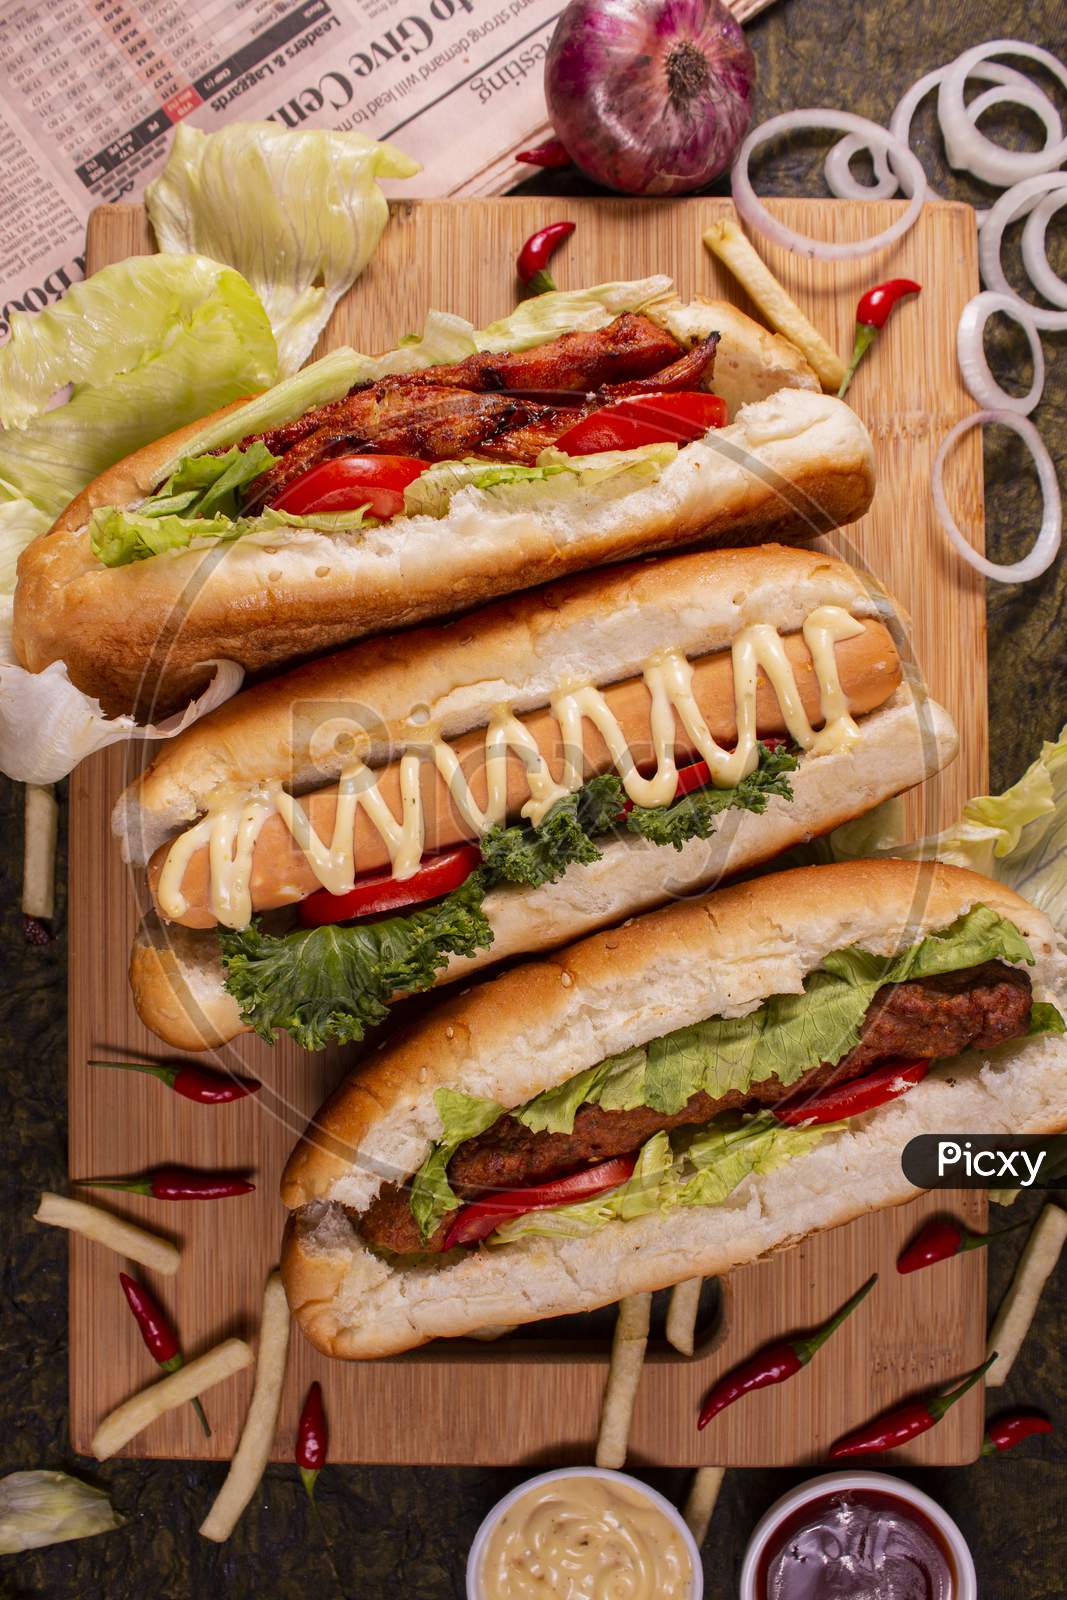 Different Variety Of Chicken Rolls Or Wrap On Wooden Plate And Black Background.Copy Scape.Top View.Different Variety Of Chicken Bun Rolls Or Wrap On Wooden Plate And Black Background.Copy Scape.Top View.